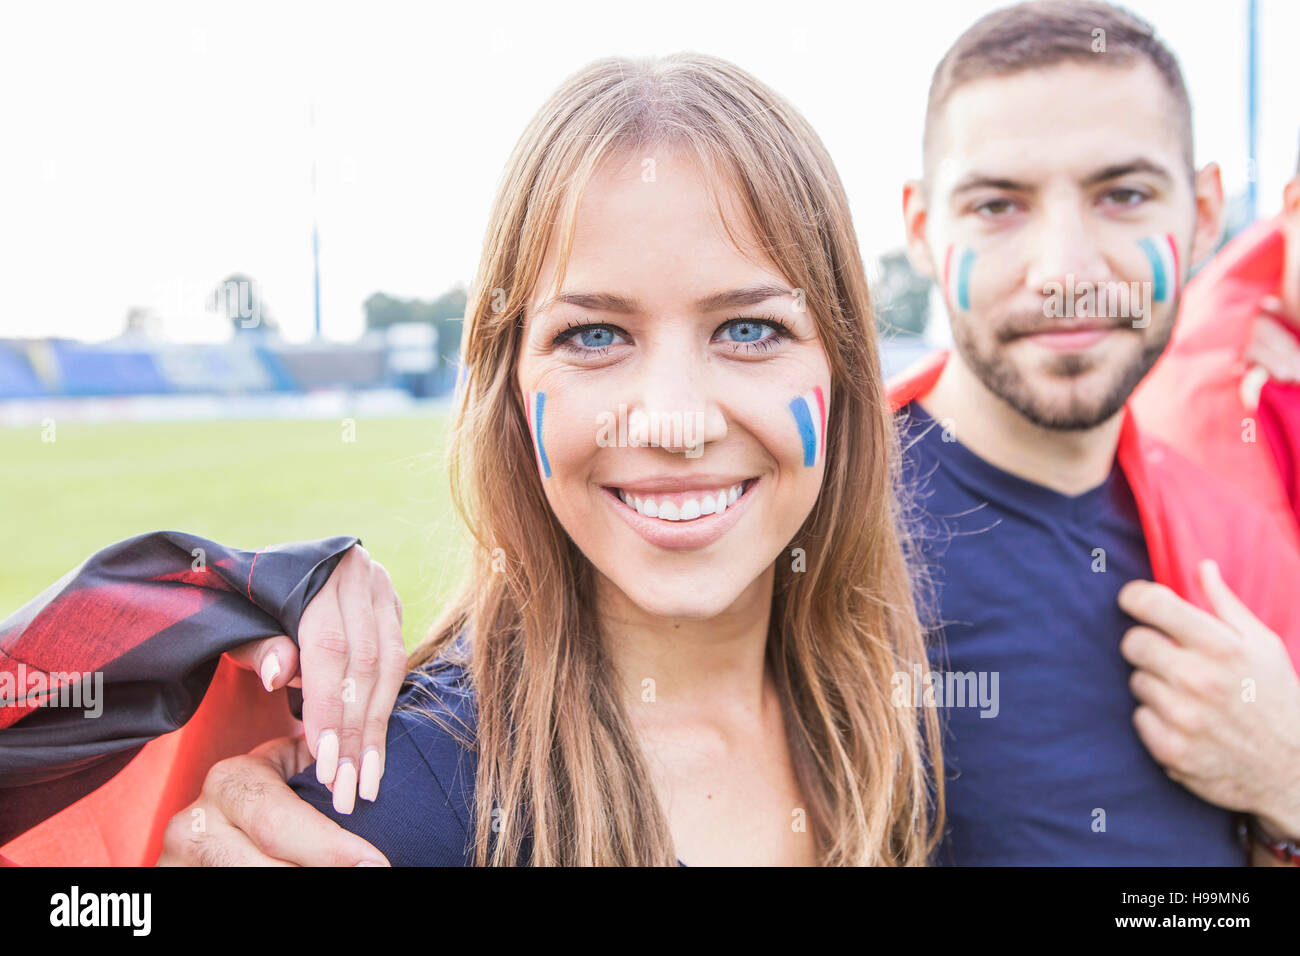 Portrait of French soccer fans with face paint Stock Photo